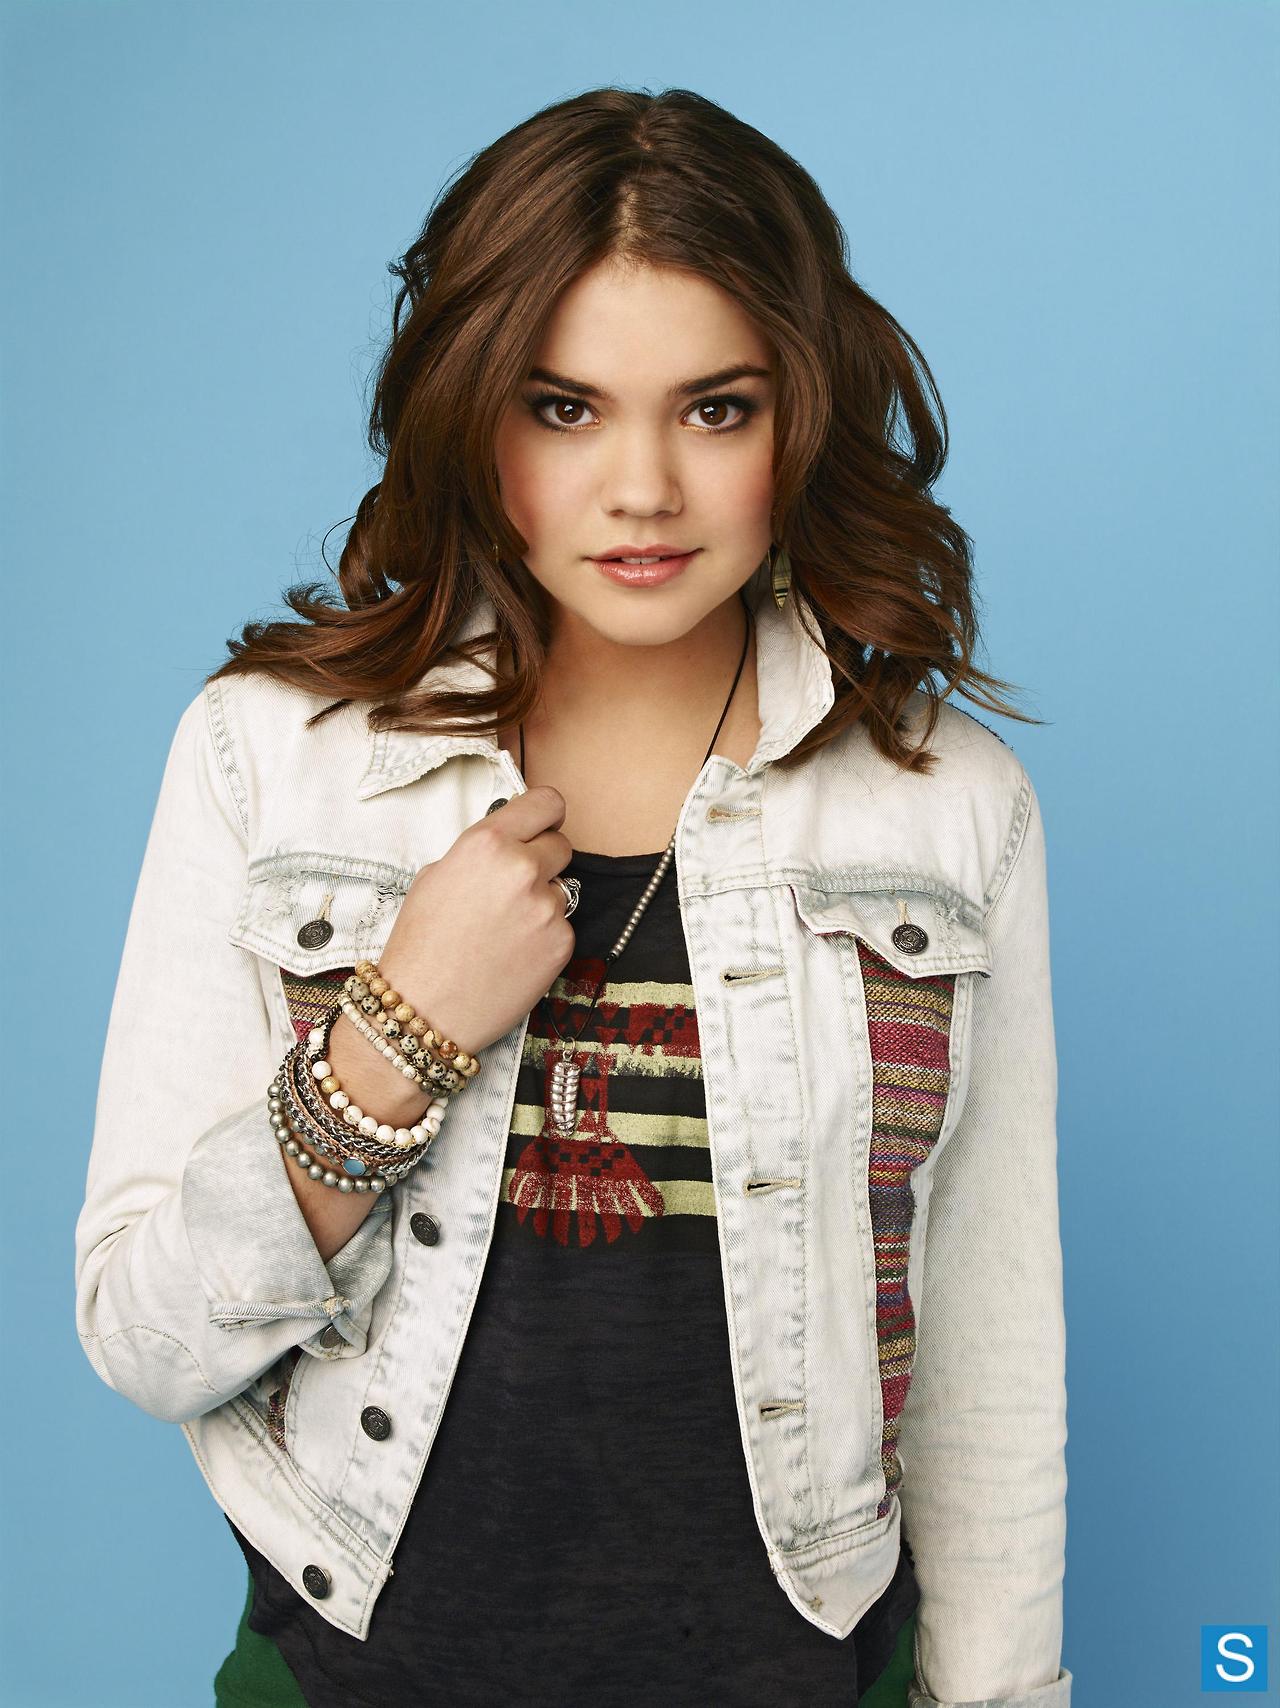 Picture Of Maia Mitchell In The Fosters Maia Mitchell 1367169235 Teen Idols 4 You